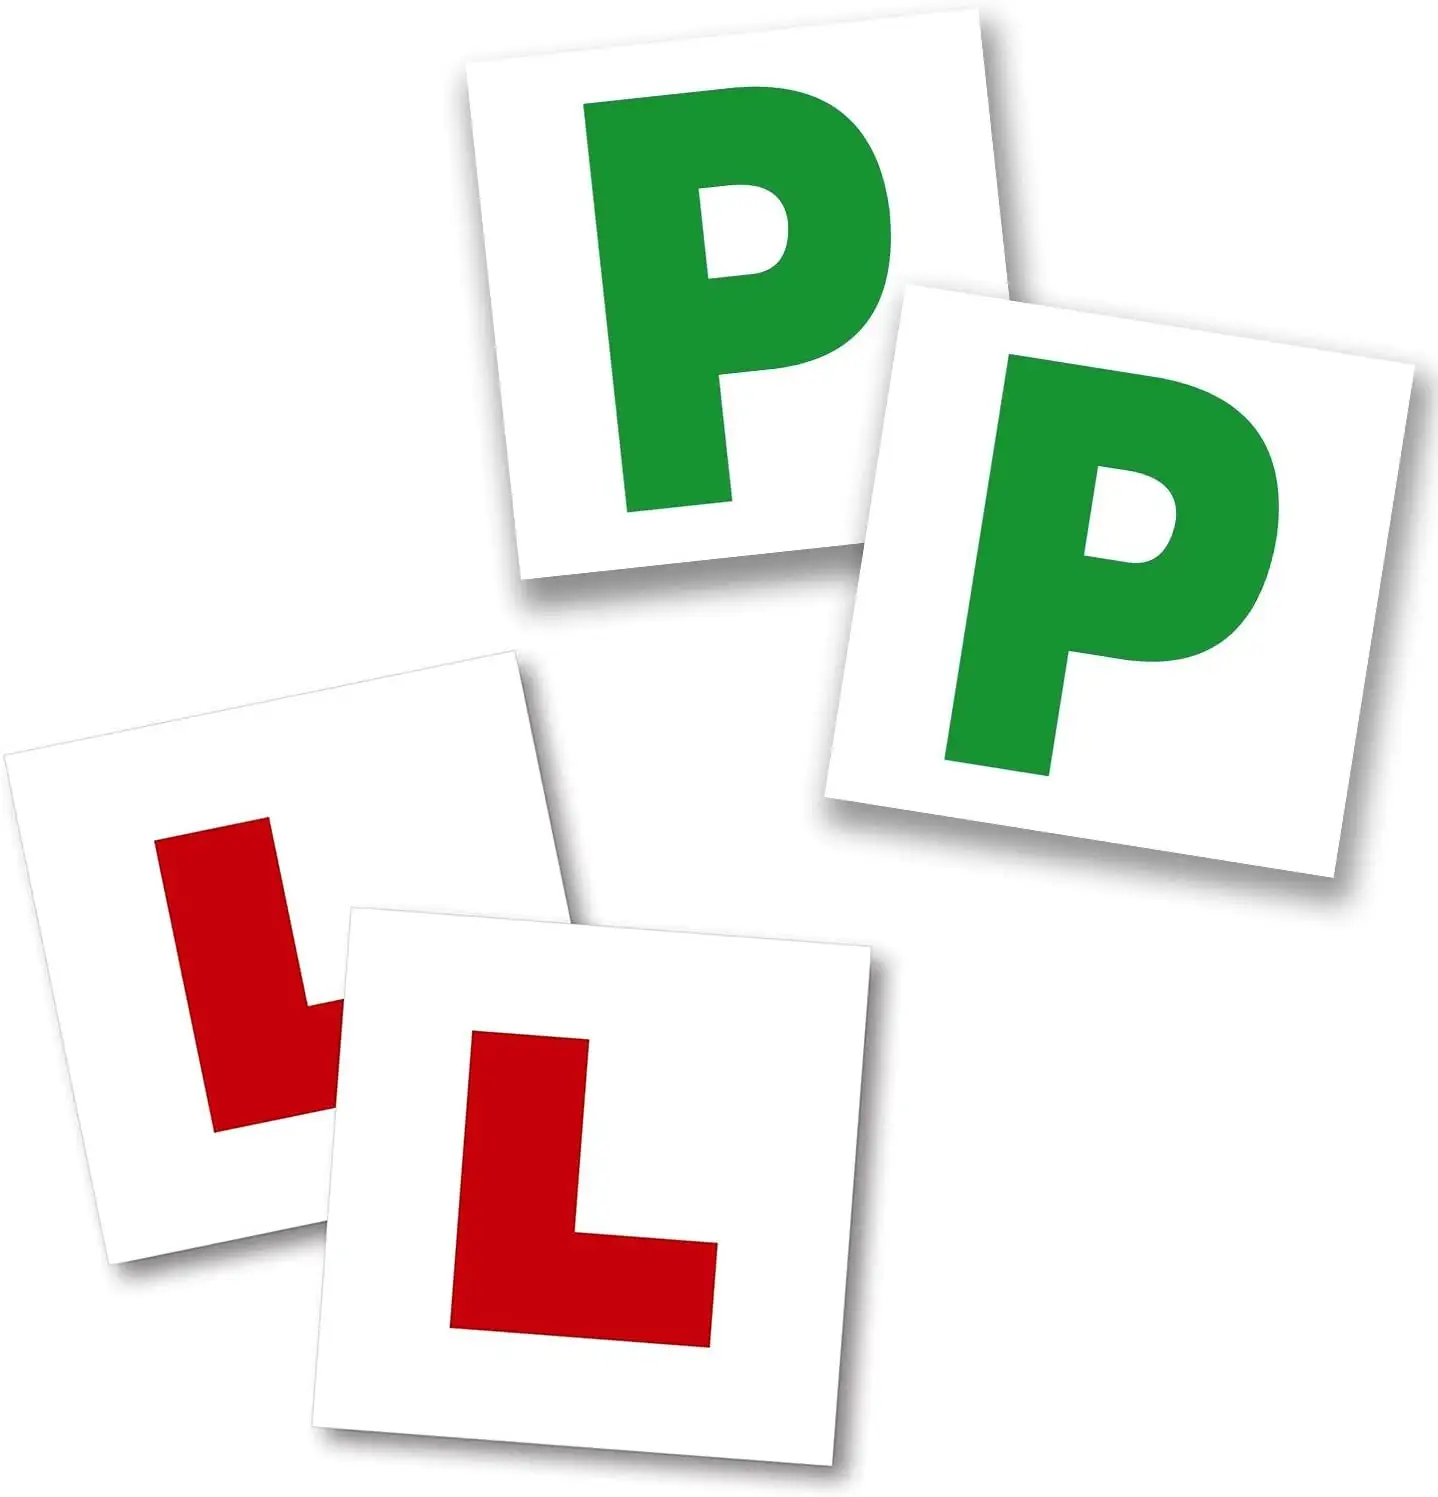 Magnetic L&P plates for learners for car red L plates for learners, Green P for new drivers, easy to attach and remover